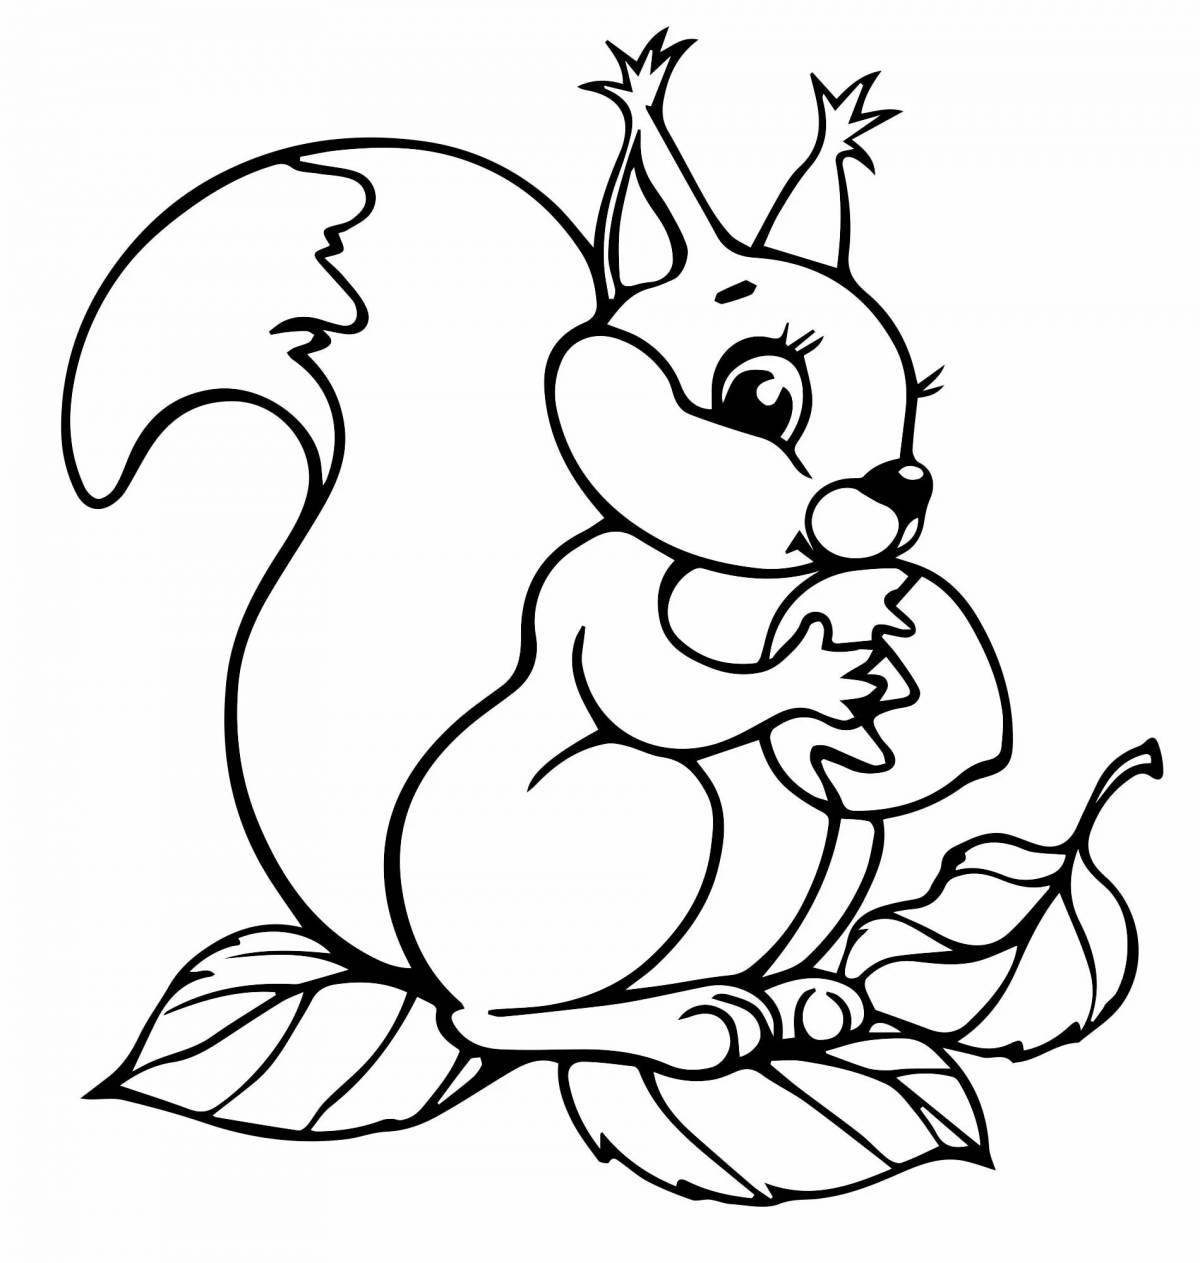 Fun coloring squirrel for children 6-7 years old